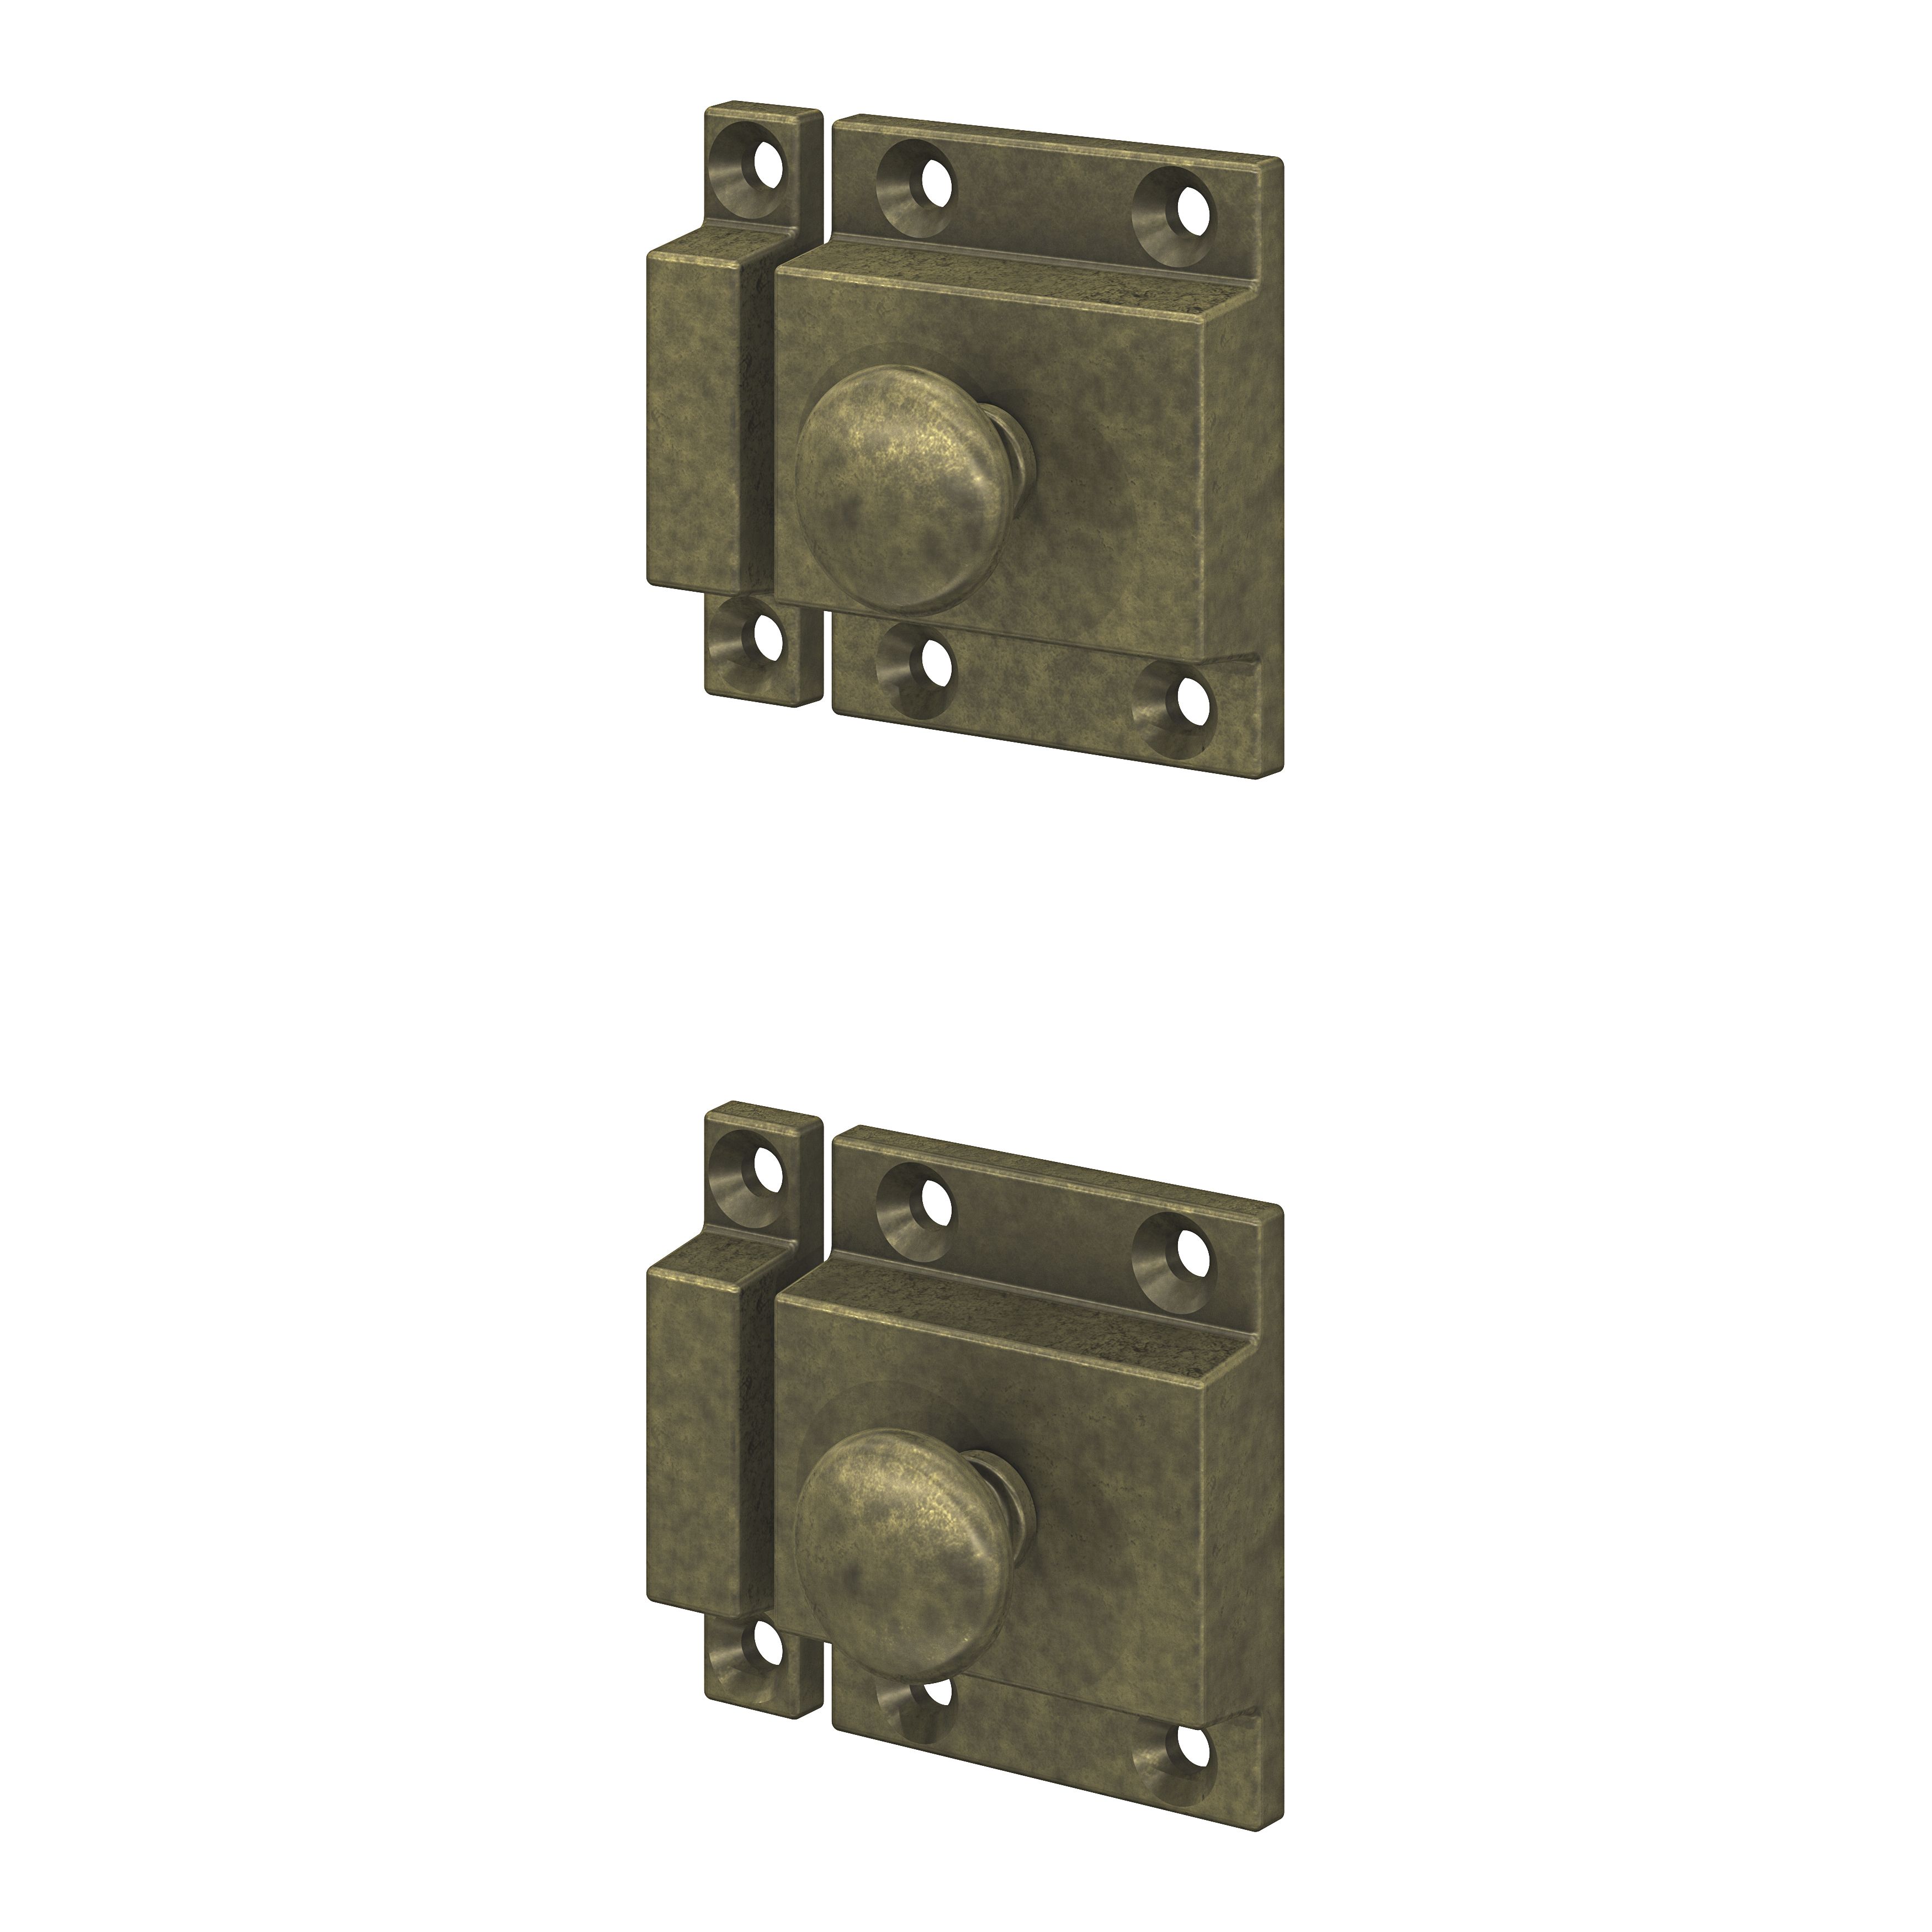 GoodHome Chervil Antique brass effect Kitchen Cabinet Latch Pack of 2 (L)52mm (H)50mm